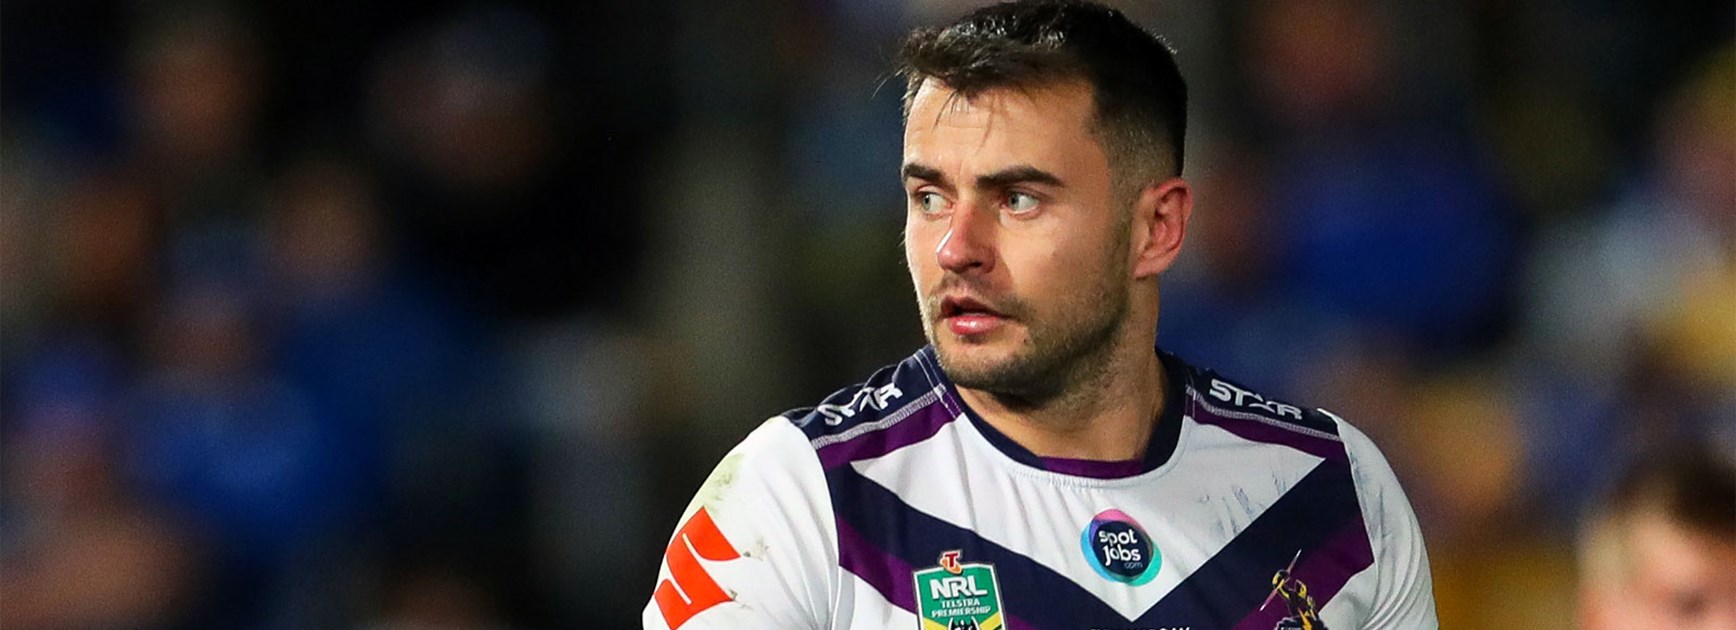 Ryan Morgan enjoyed a winning start to life as a Storm player against his old Parramatta teammates in Round 11.